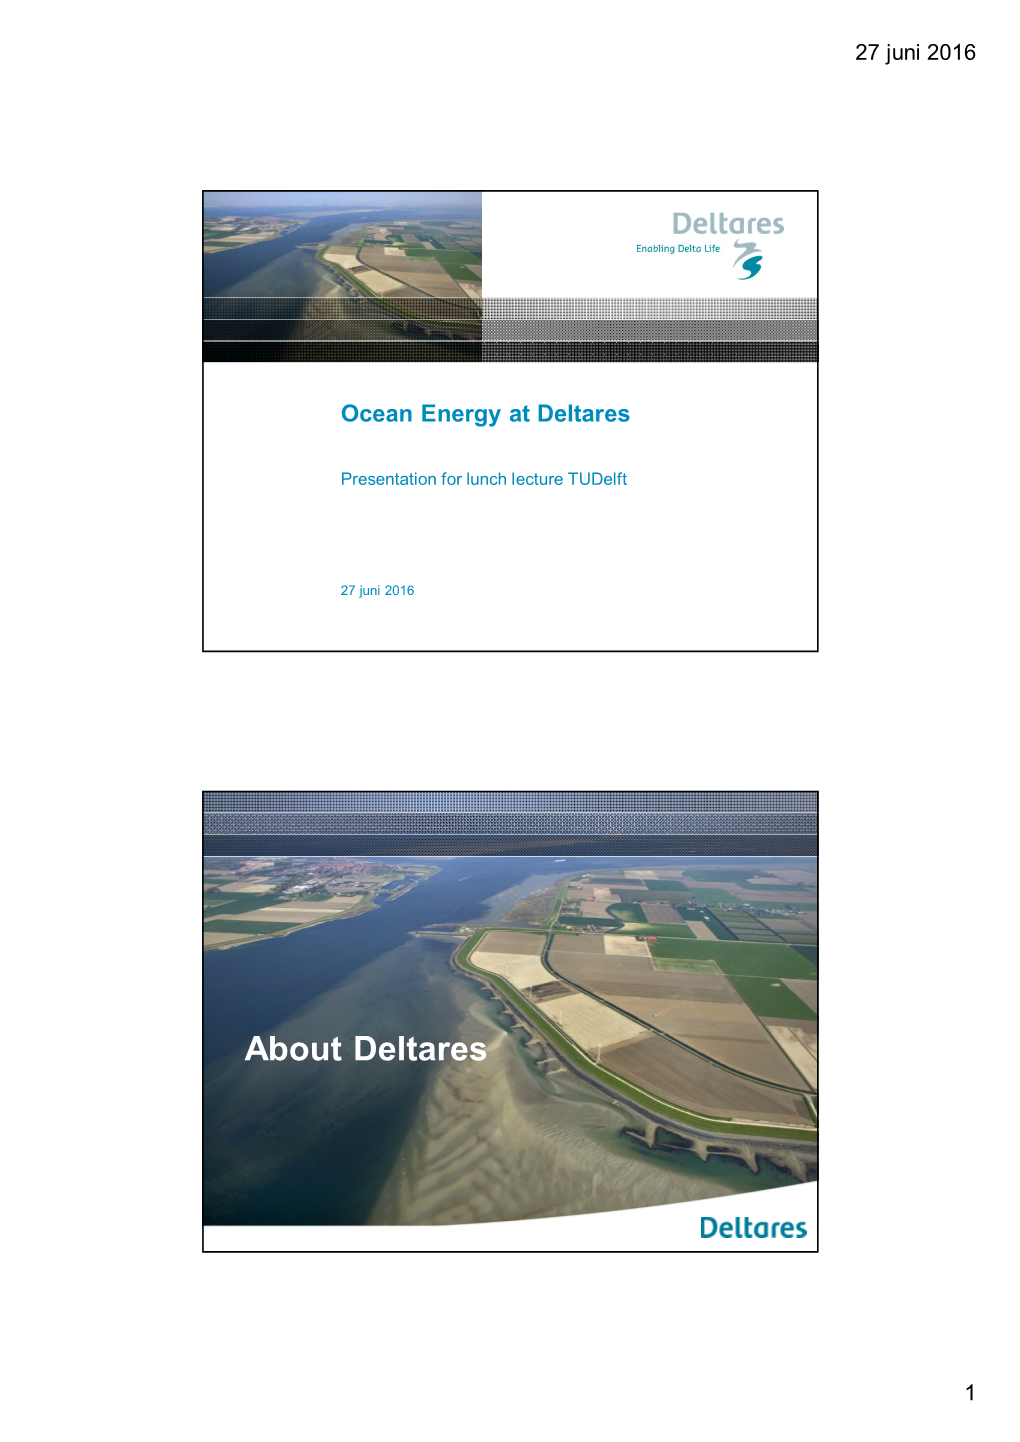 About Deltares